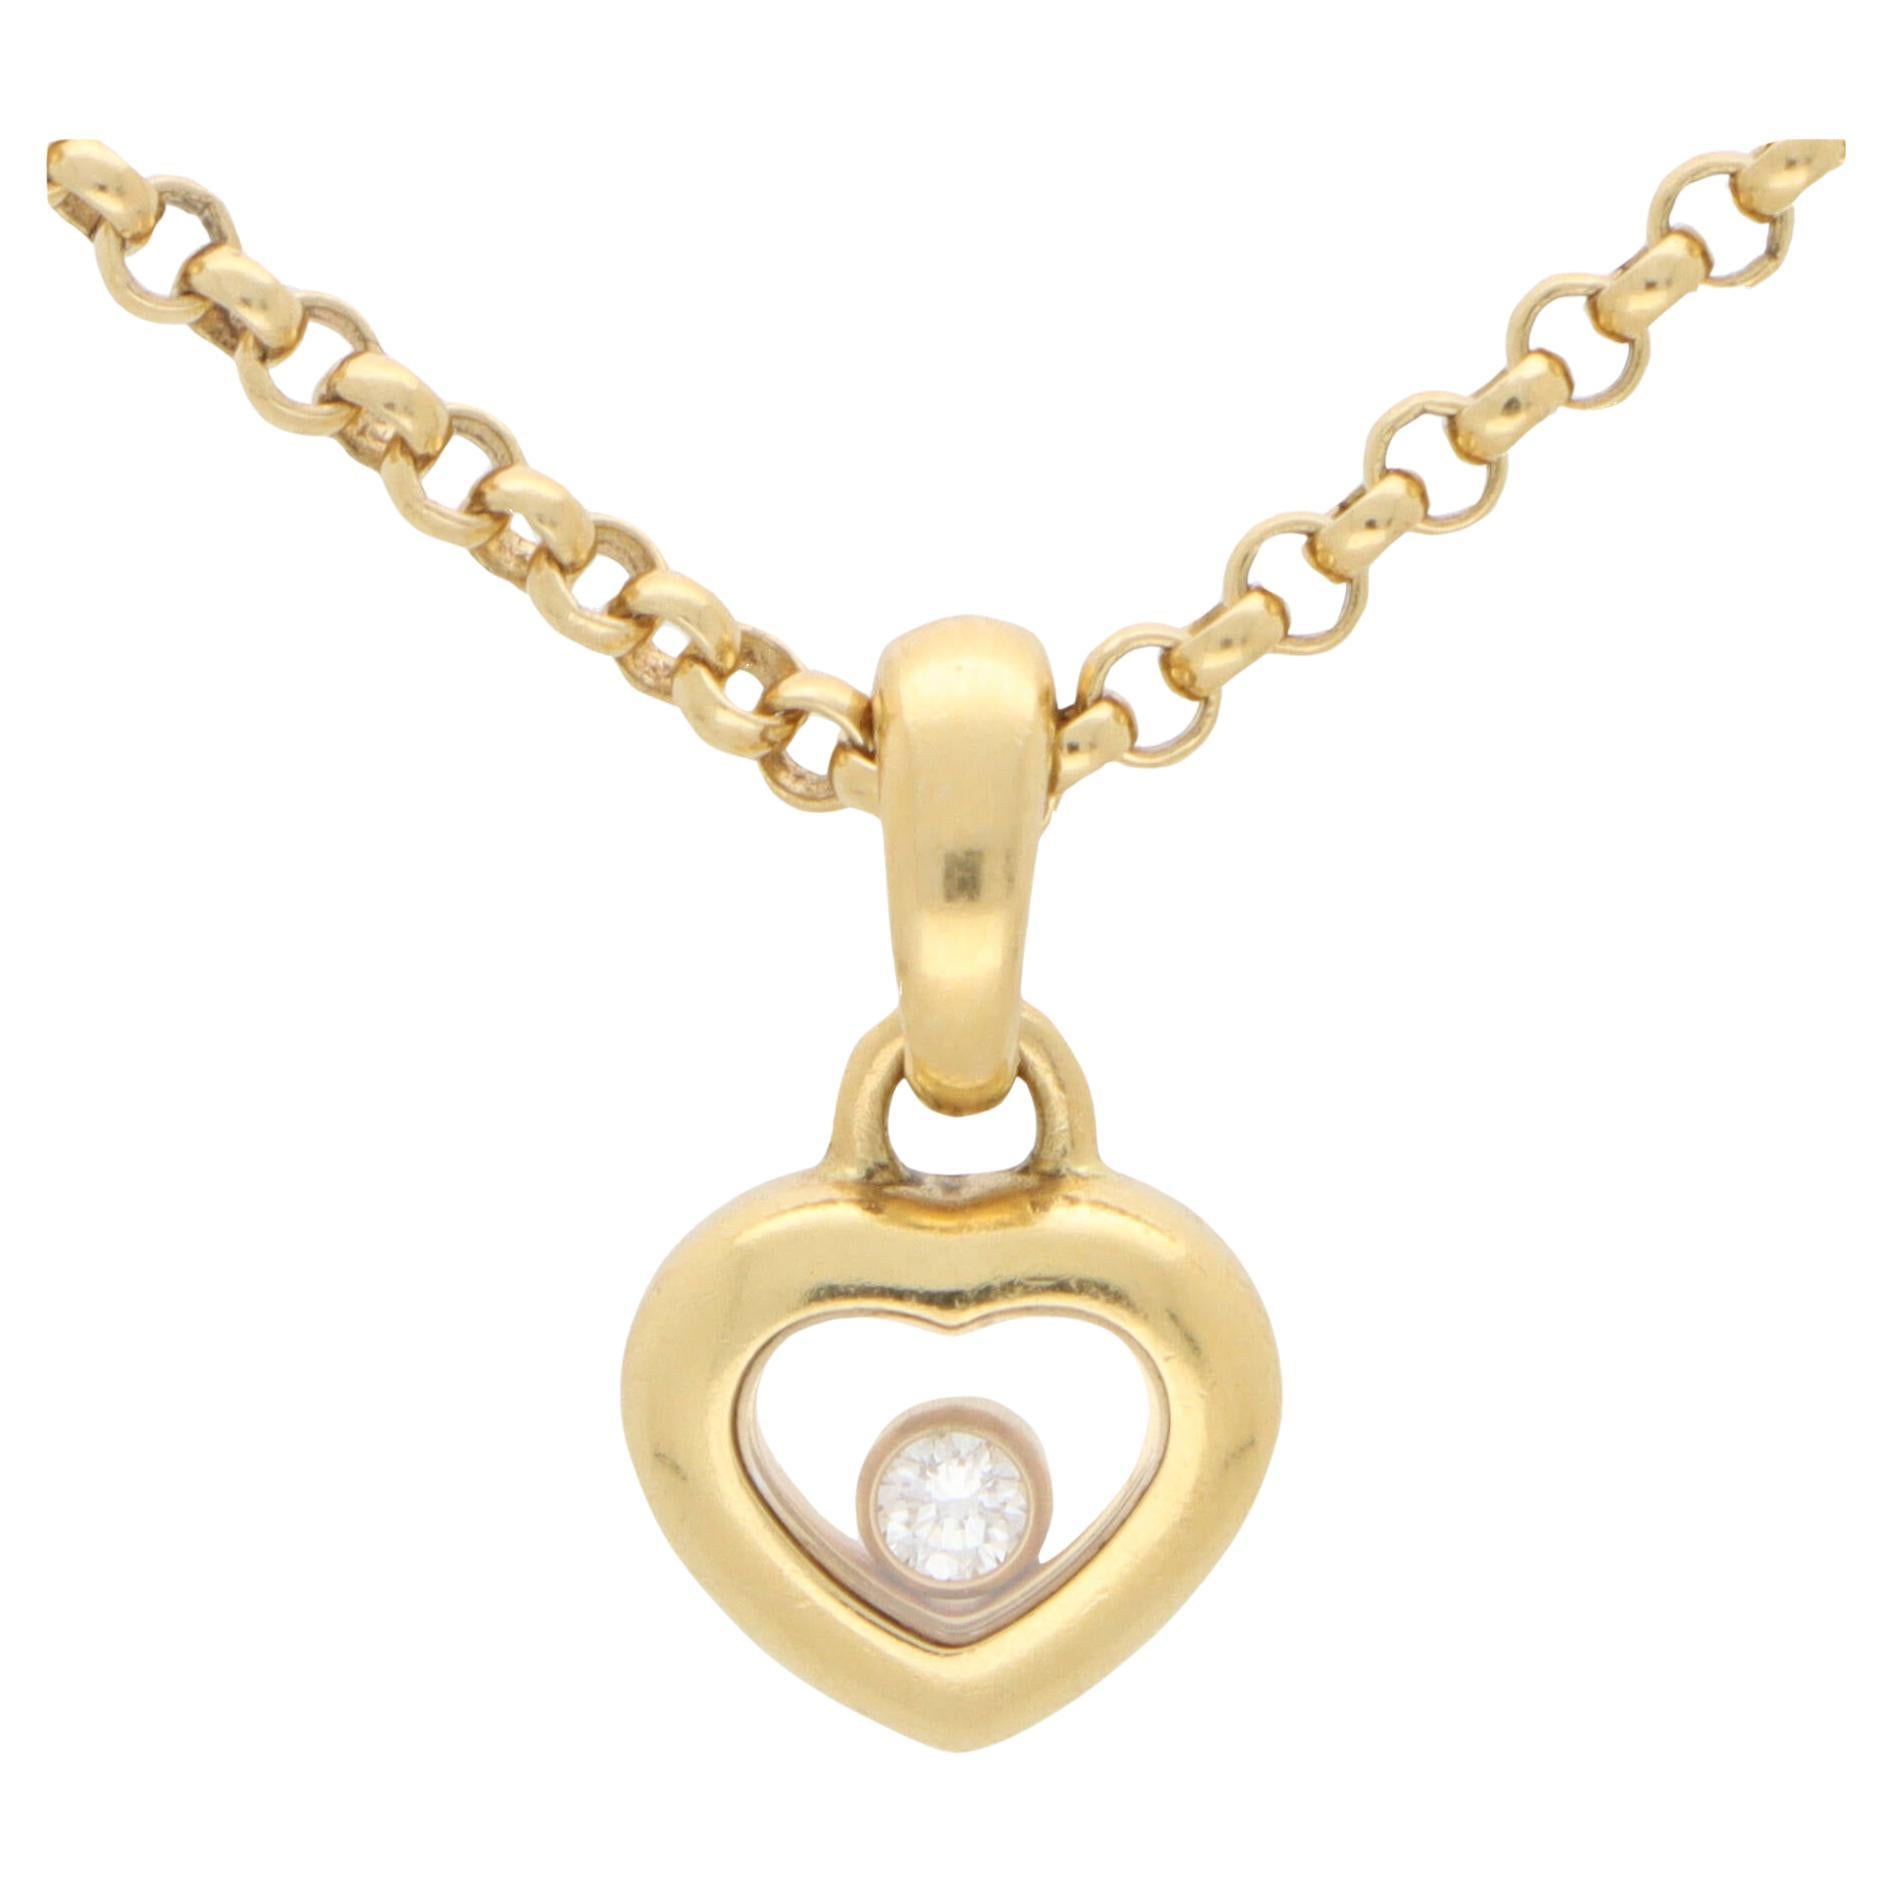 Vintage Chopard Happy Diamonds Necklace in 18k Yellow Gold